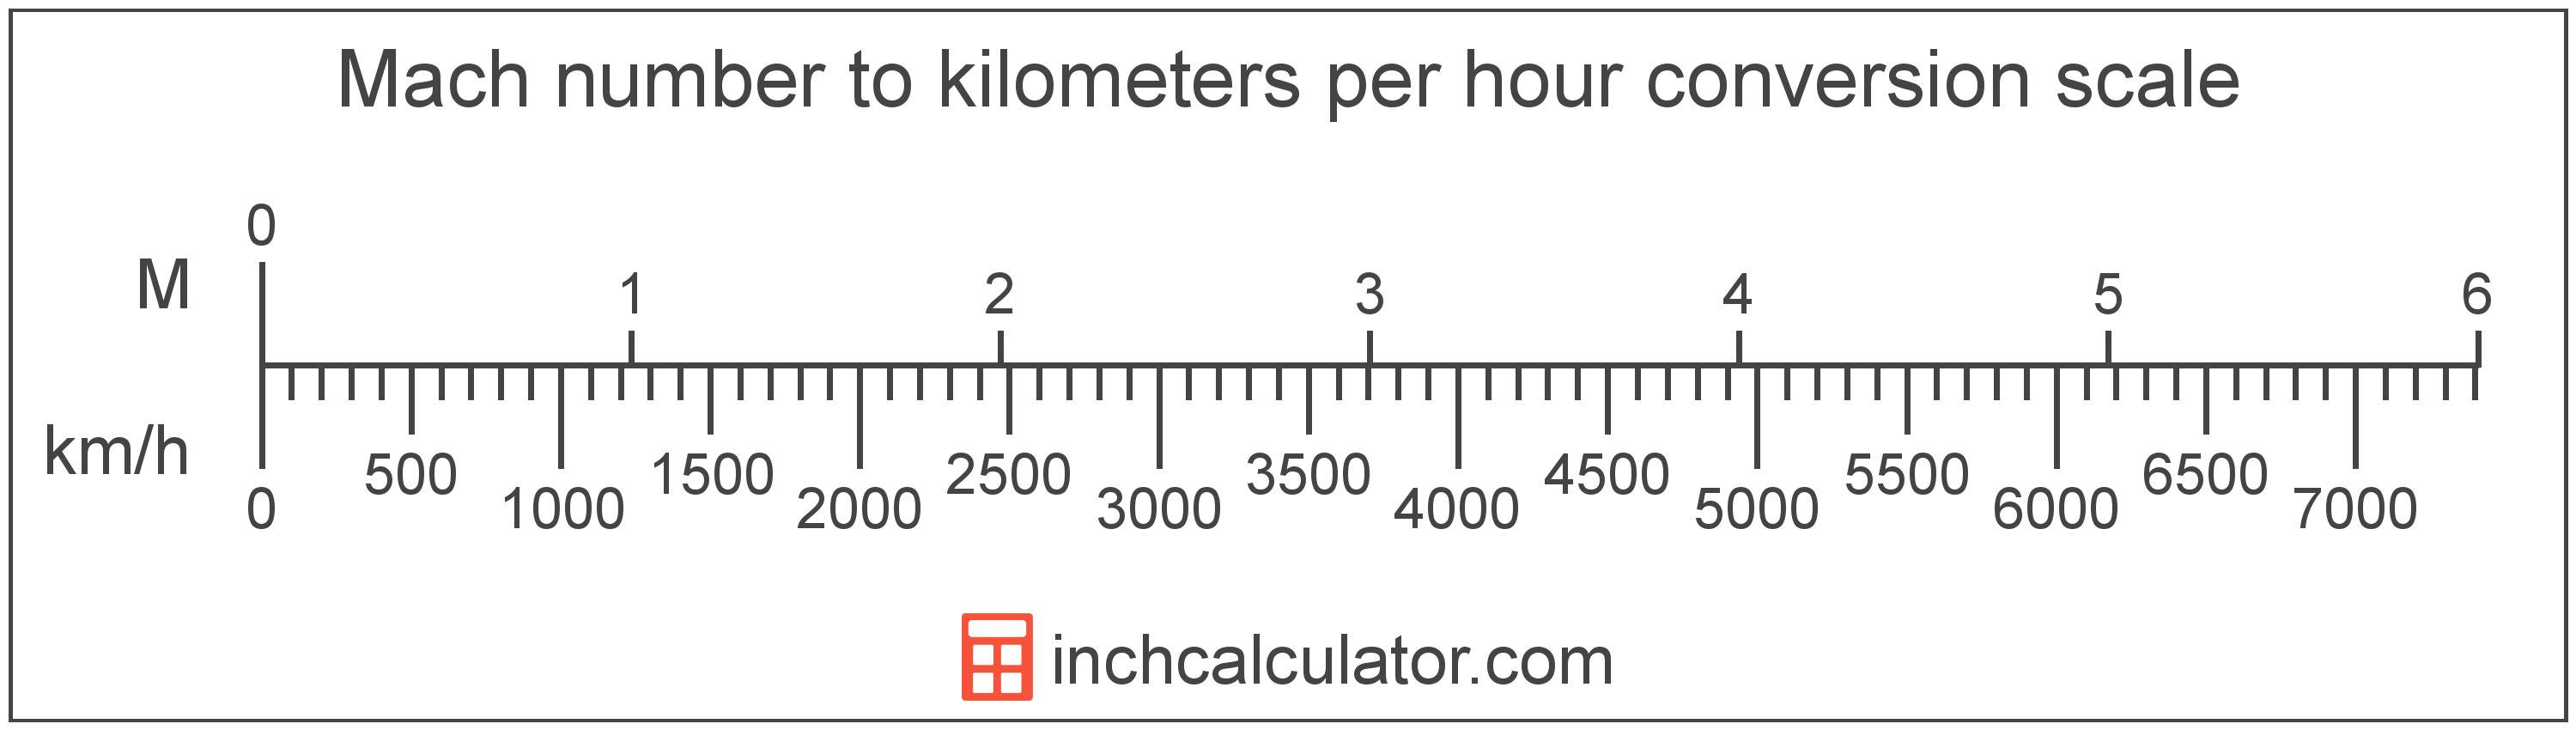 conversion scale showing Mach number and equivalent kilometers per hour speed values